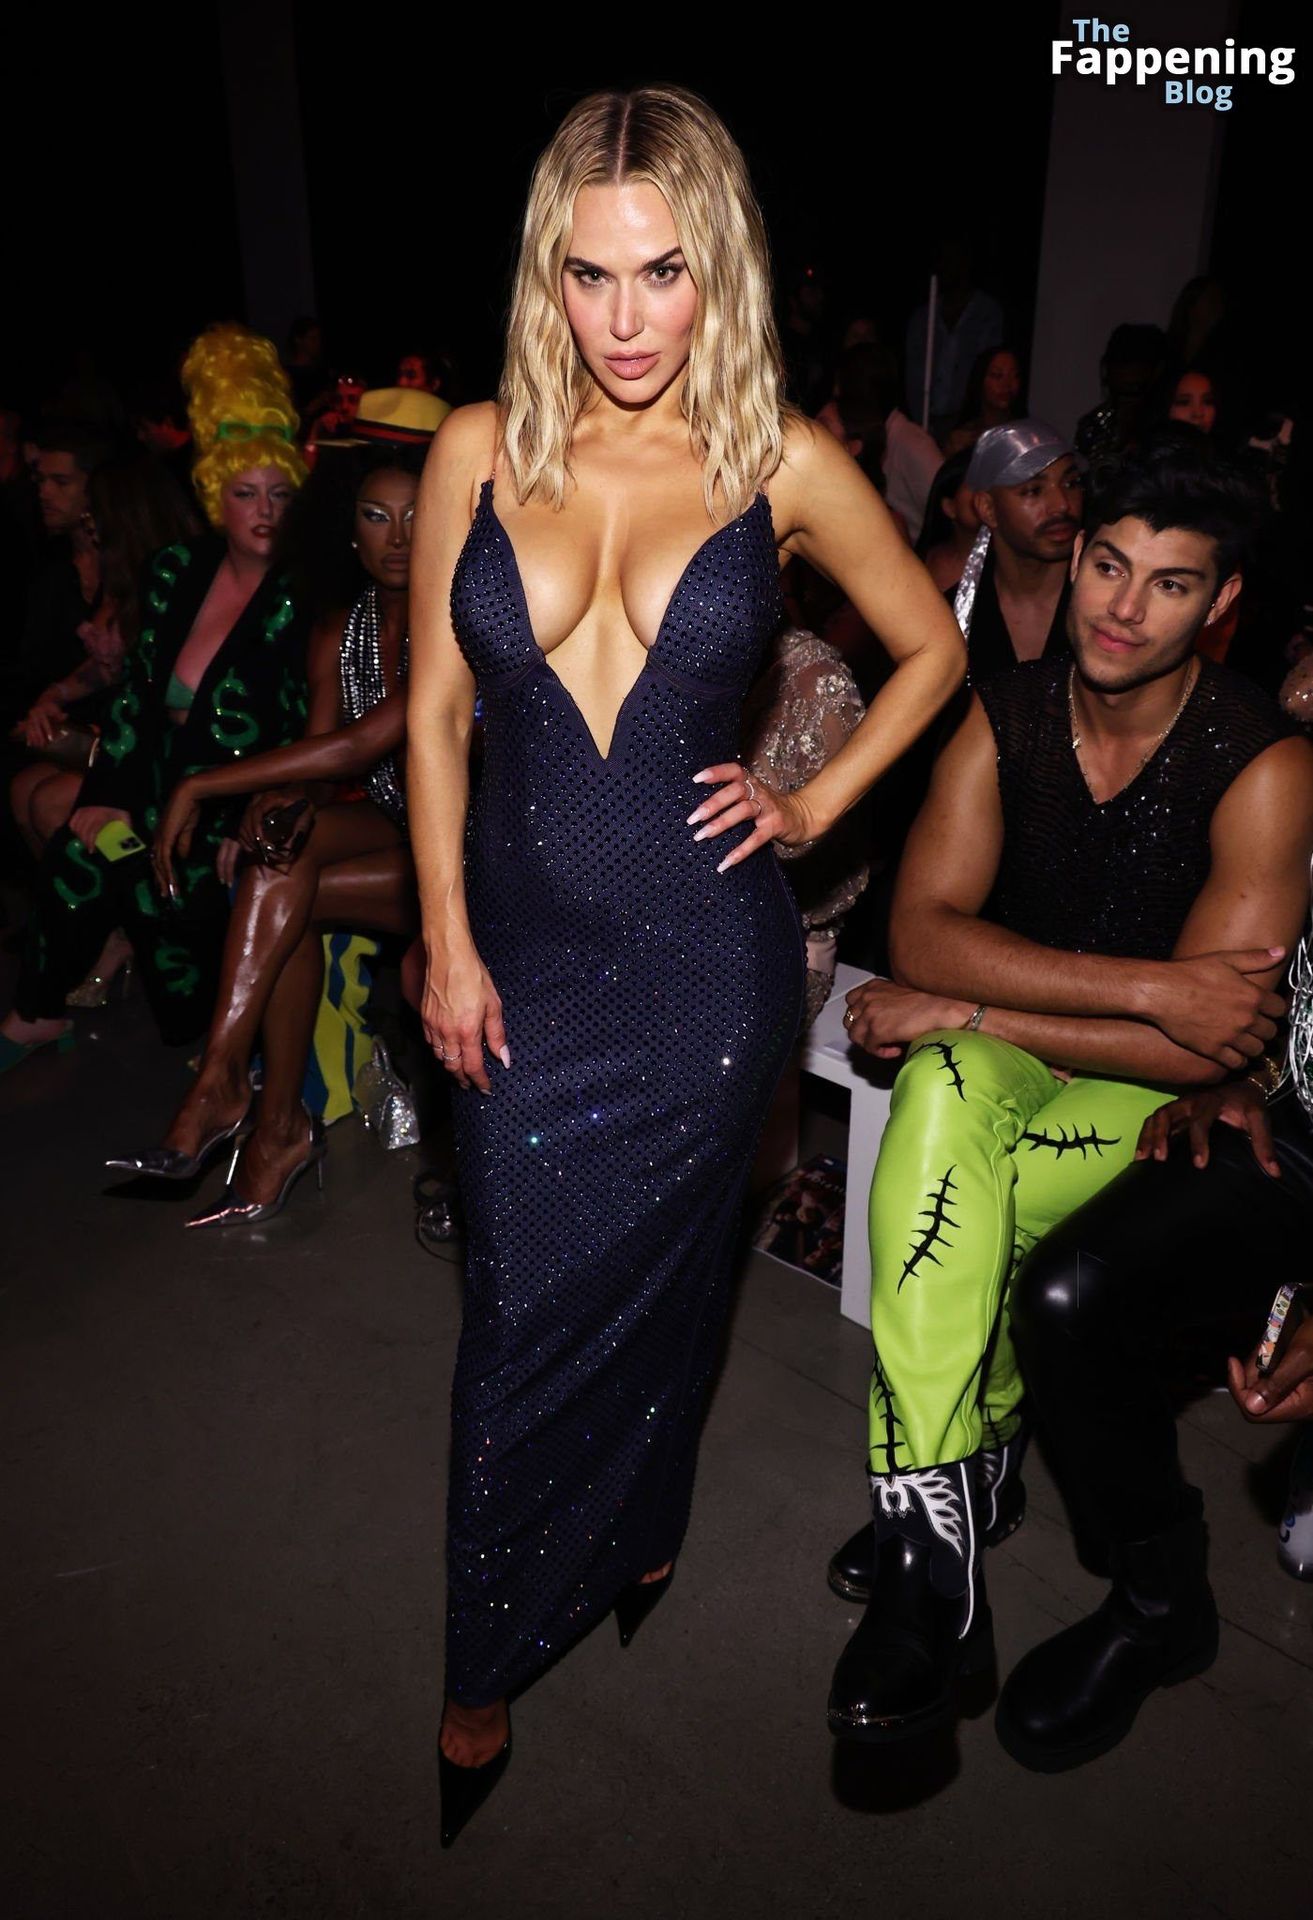 CJ Perry Shows Her Huge Boobs at the New York Fashion Week (17 Photos)